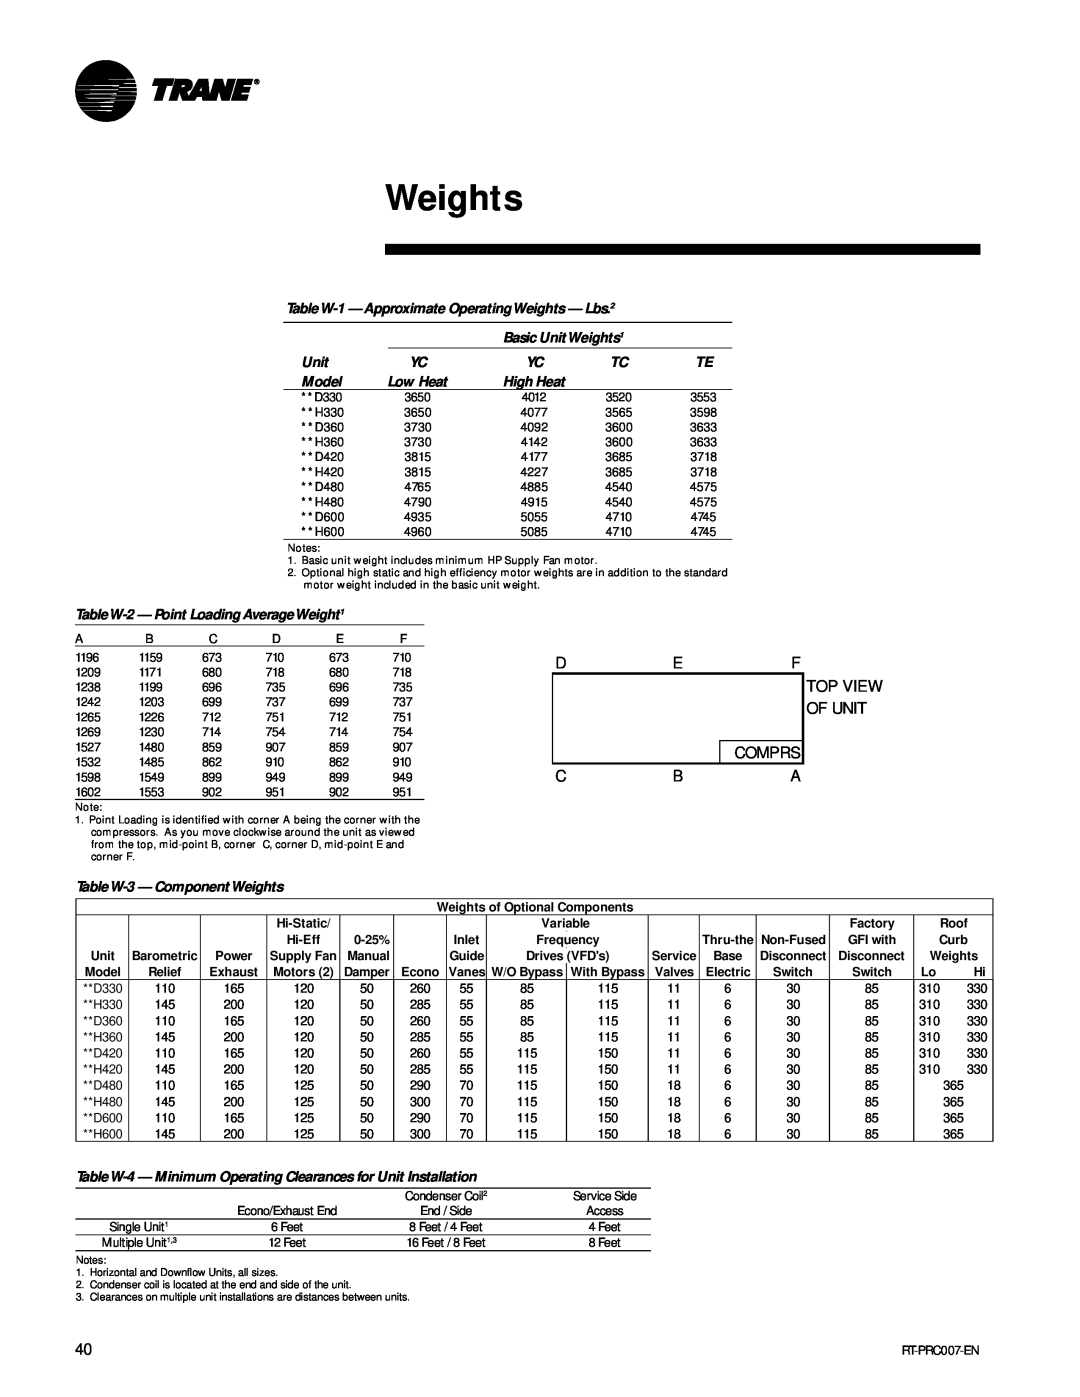 Trane RT-PRC007-EN manual TableW-1- Approximate OperatingWeights - Lbs.2, Basic UnitWeights1, Model, High Heat 